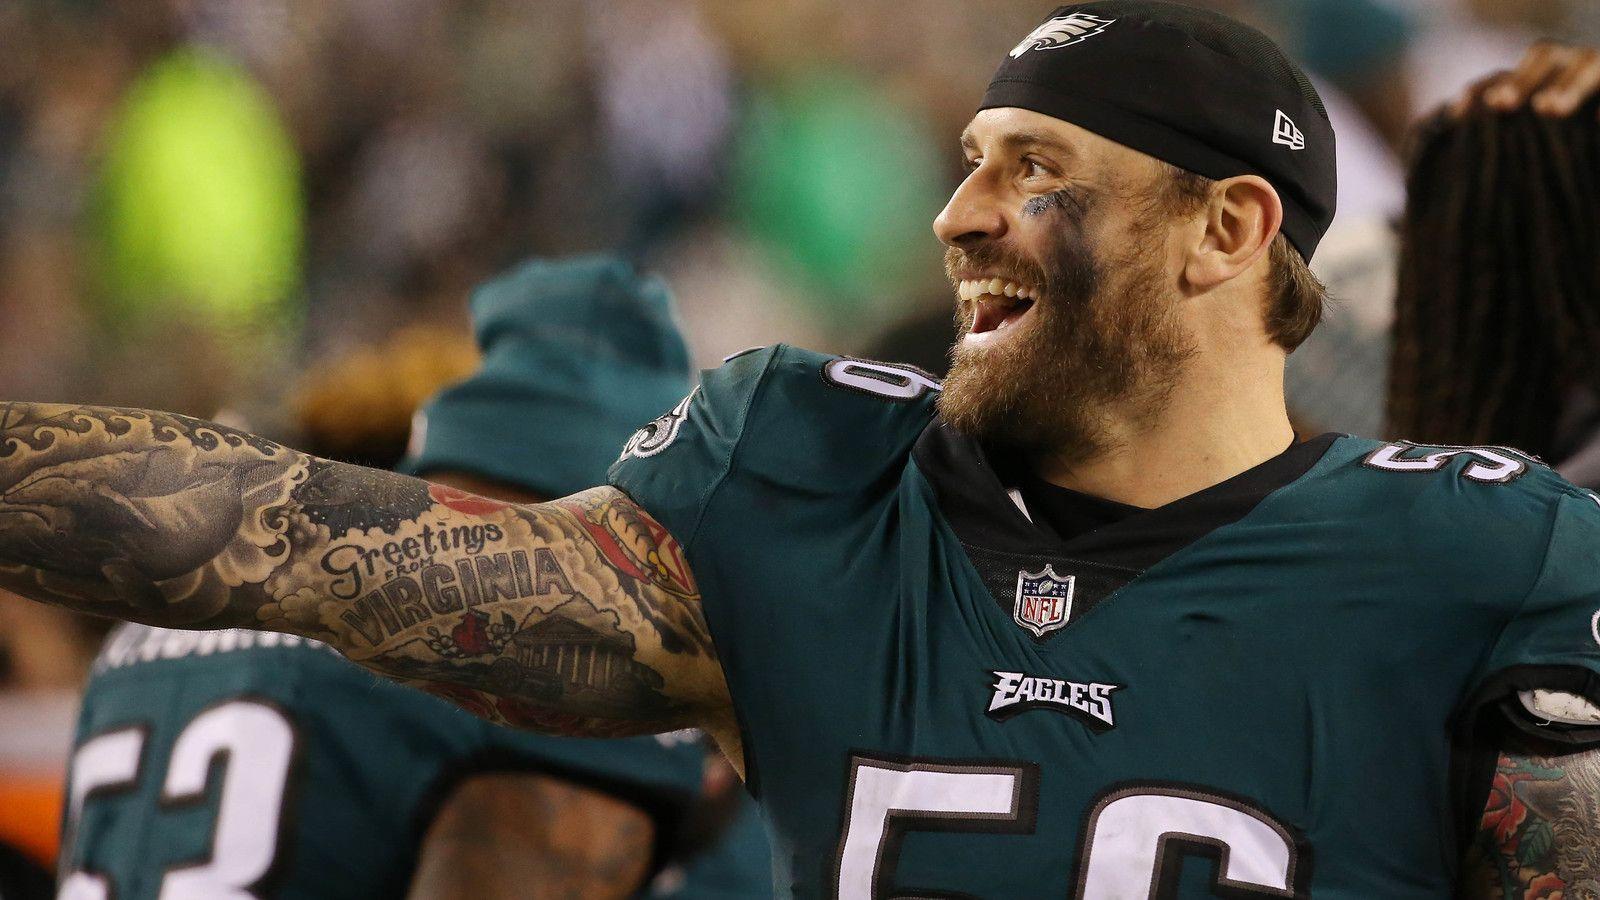 Chris Long made 'really dumb bet' to get tattoo of LB coach if